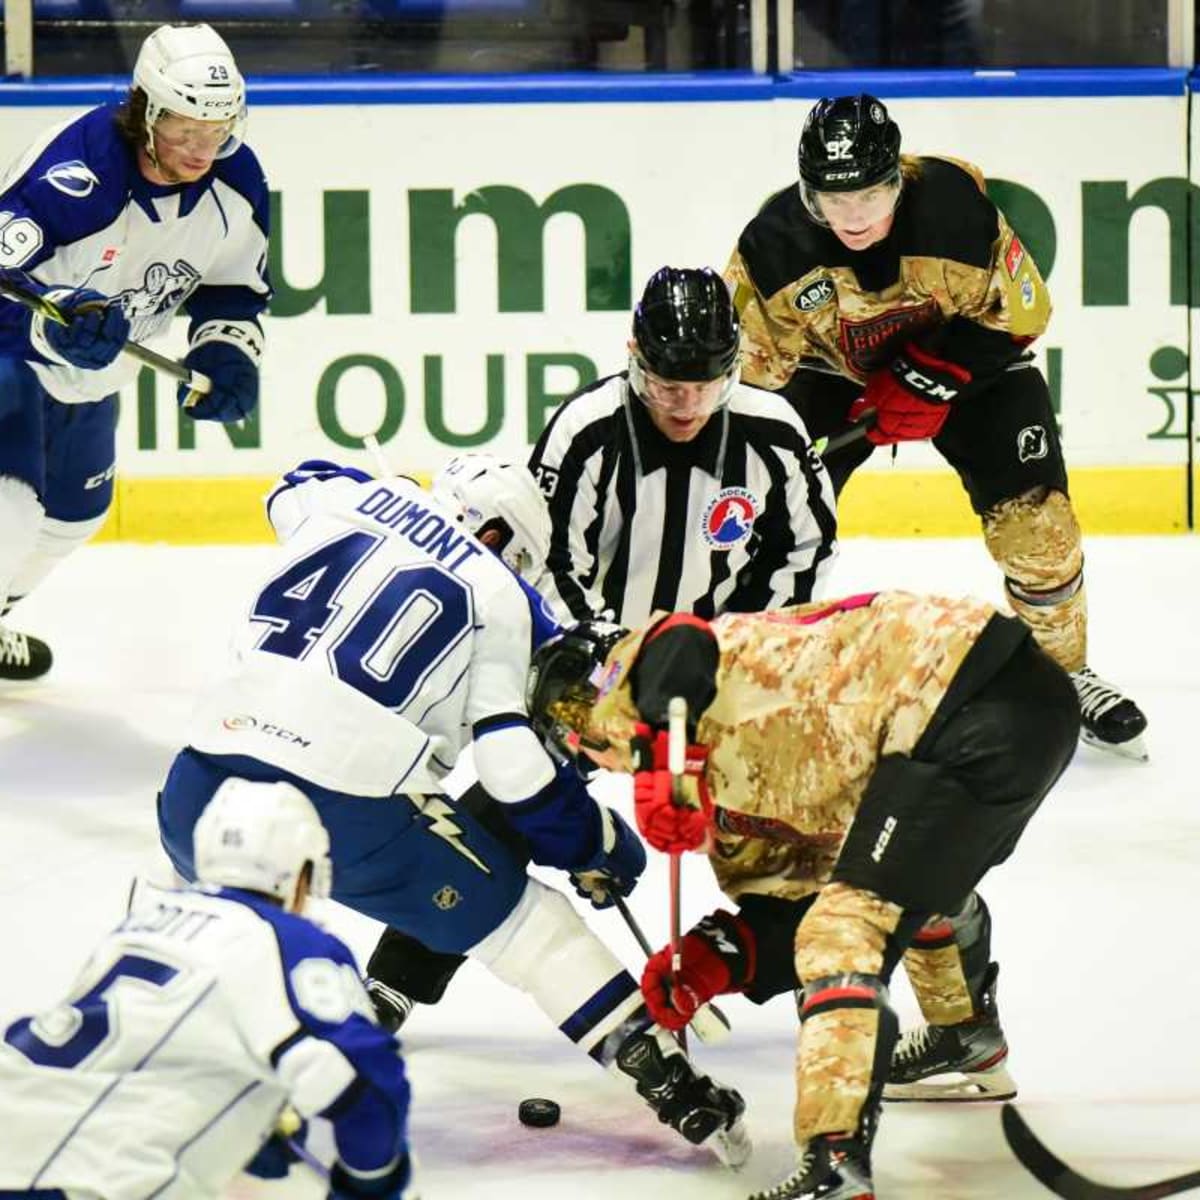 Utica Comets vs Toronto Marlies Live Stream Watch Online, TV Channel, Start Time - How to Watch and Stream Major League and College Sports